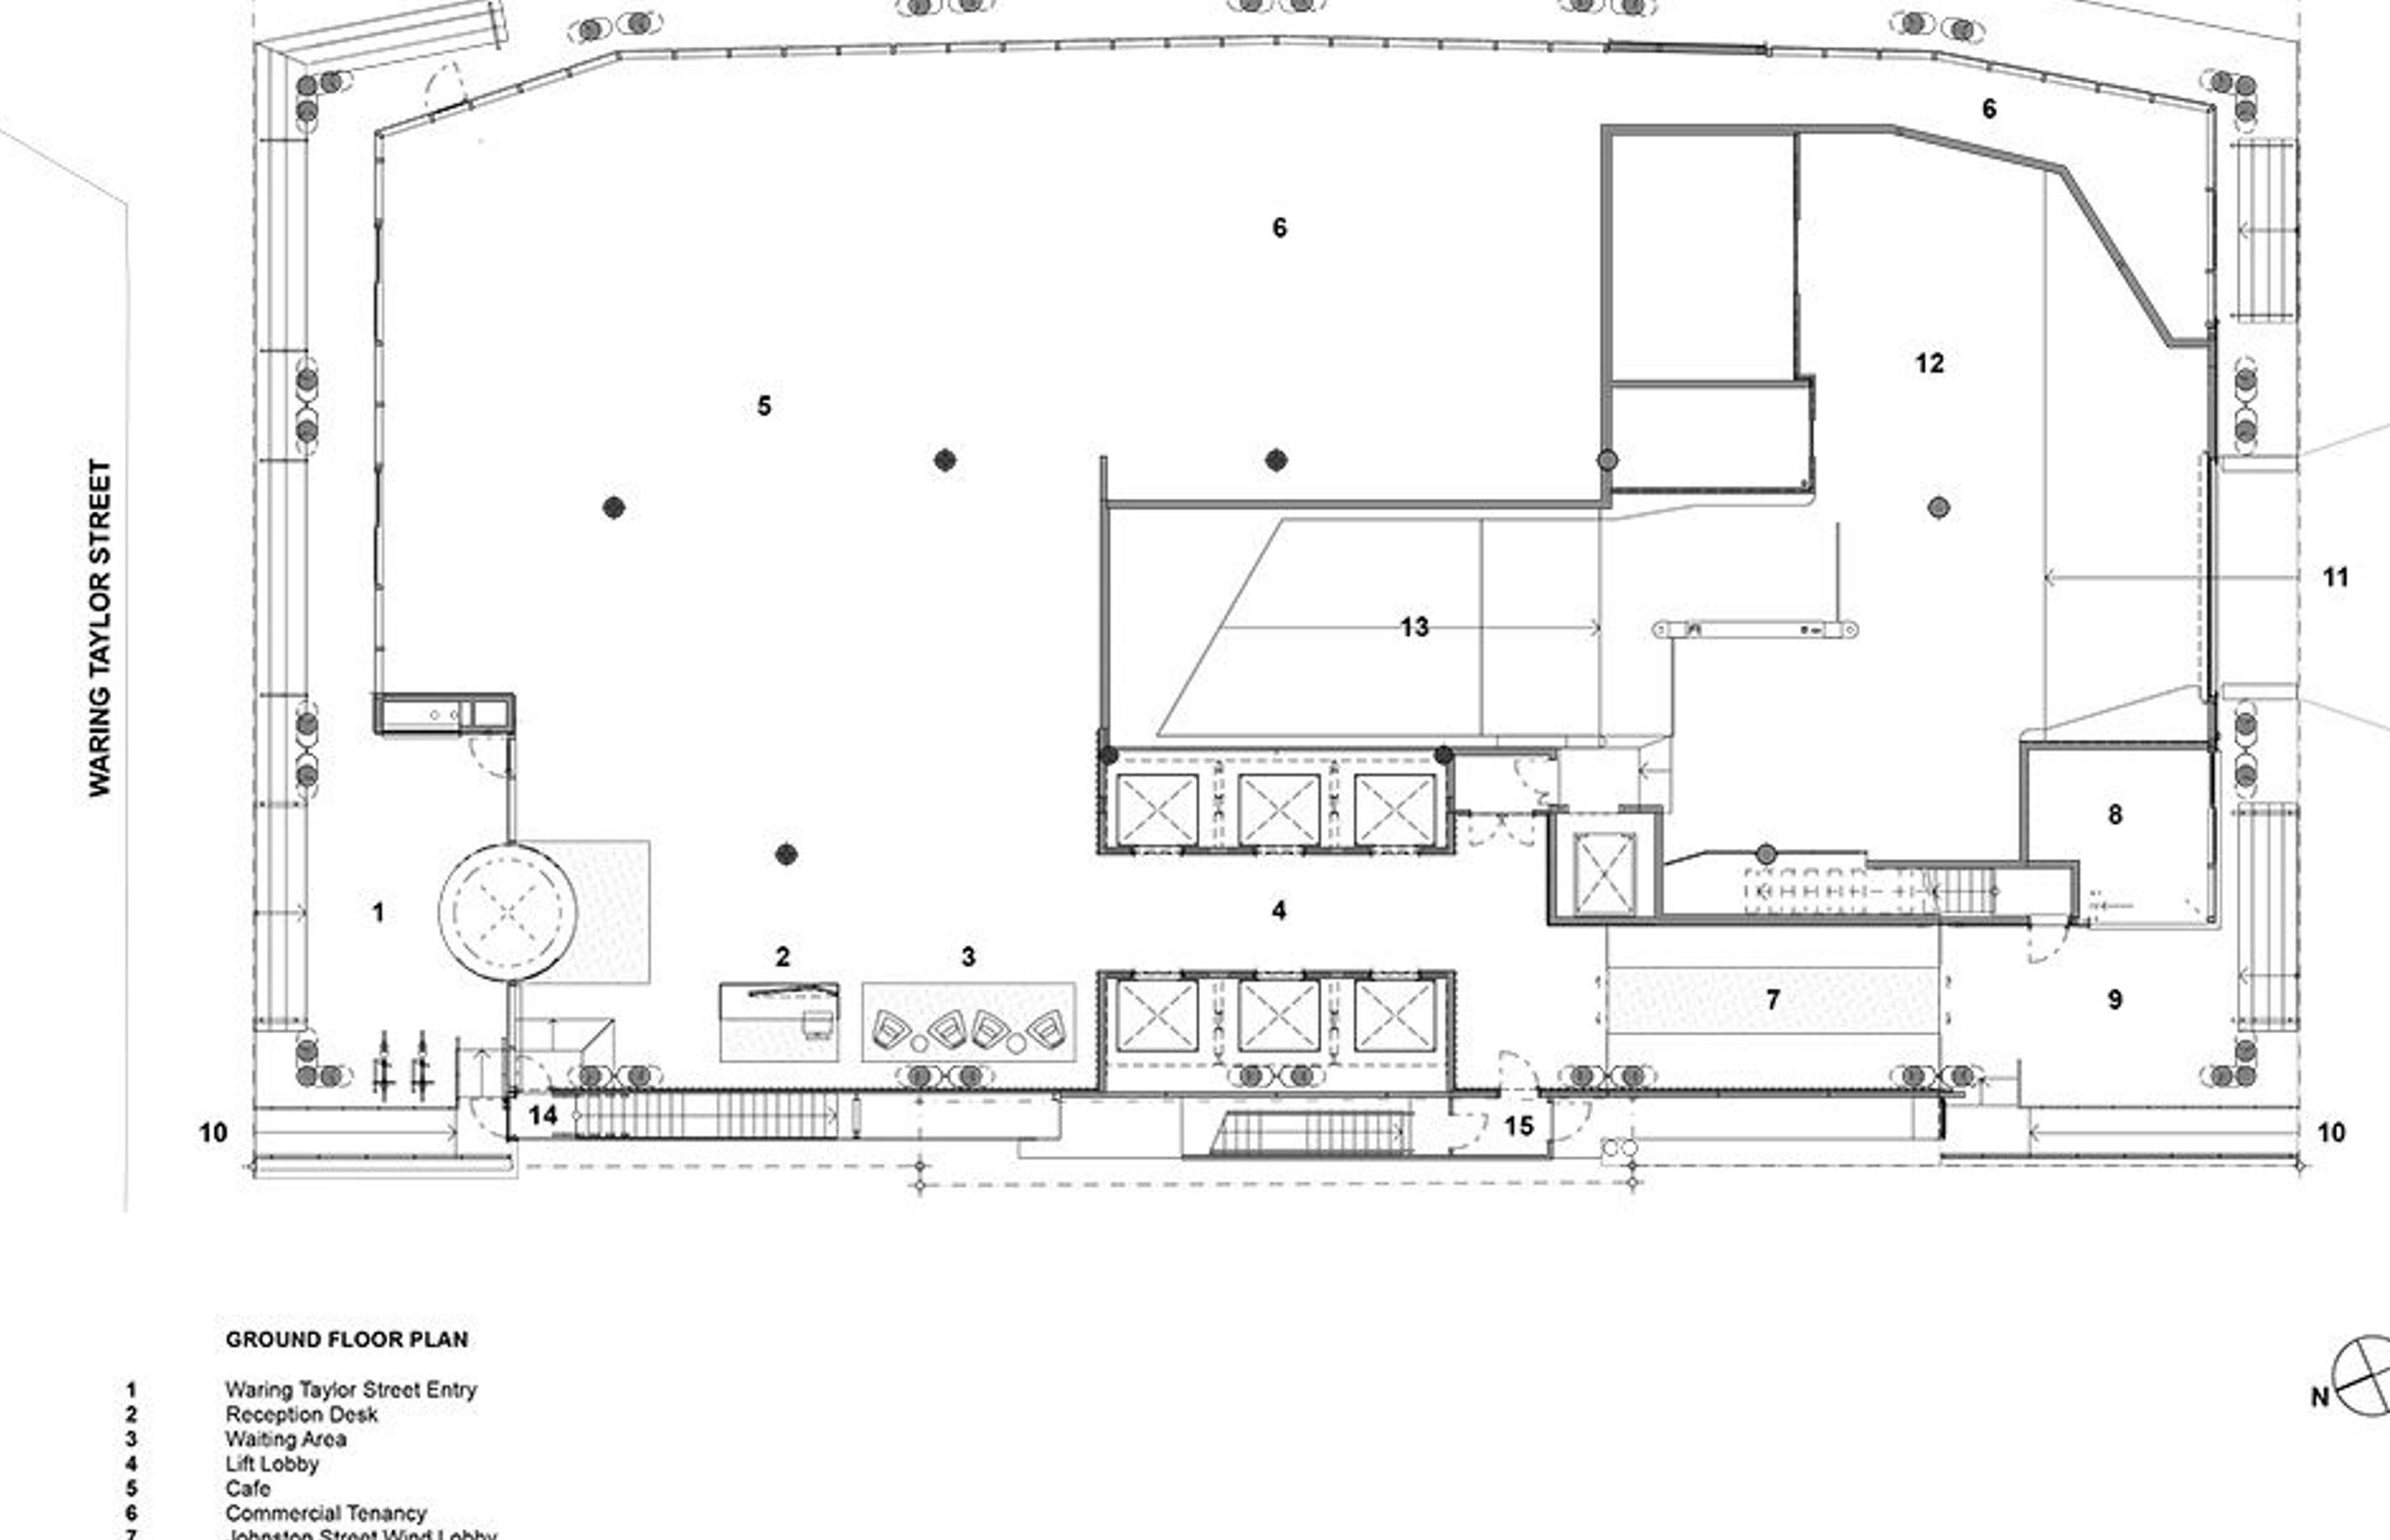 The ground-floor plan by Studio Pacific Architecture.